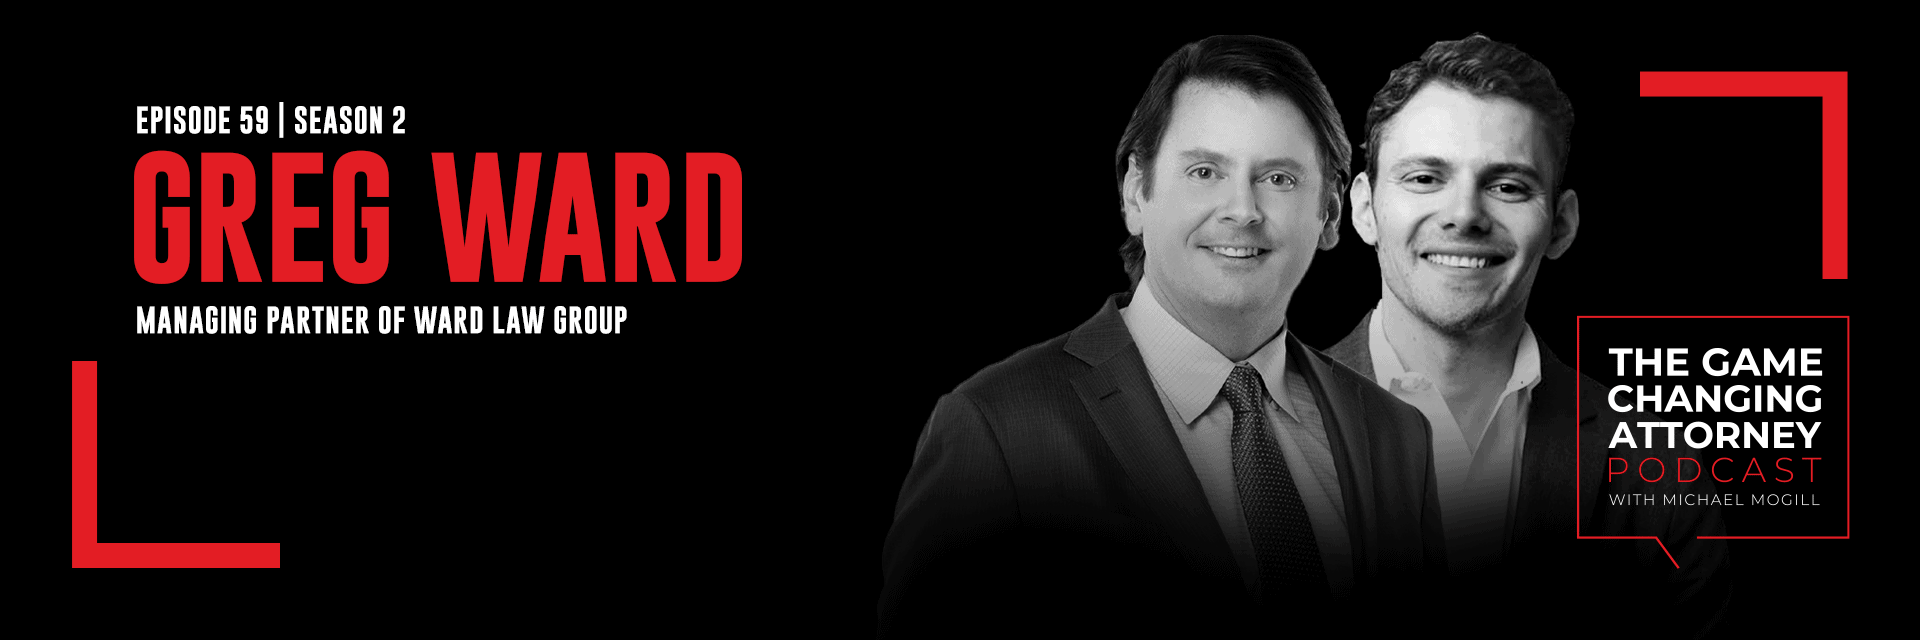 Greg Ward - The Game Changing Attorney Podcast - Desktop